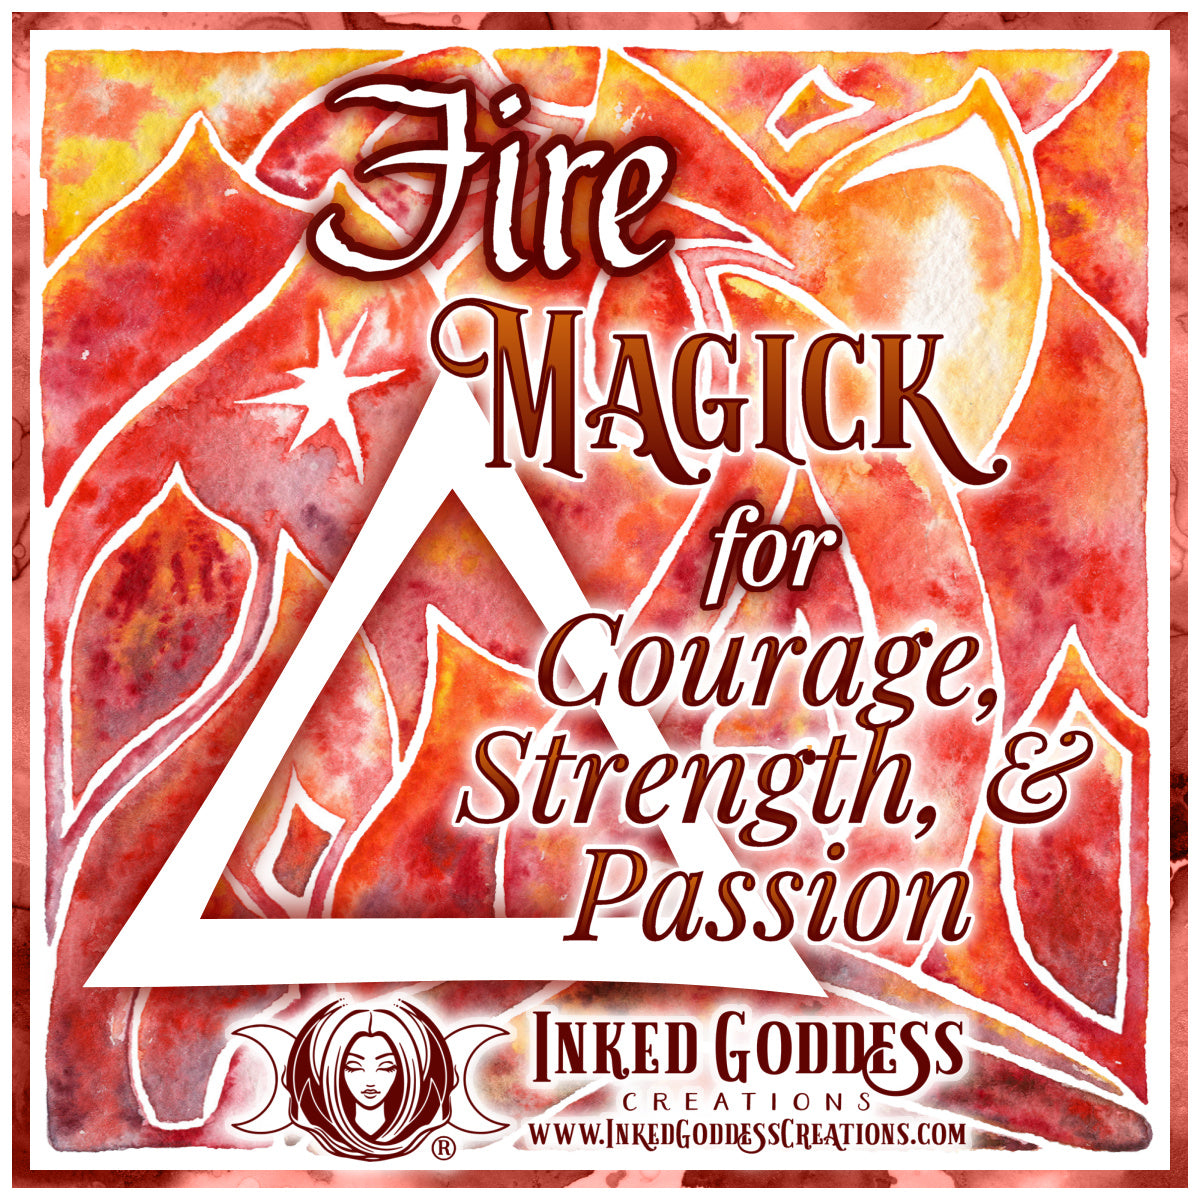 Fire Magick for Courage, Strength, & Passion